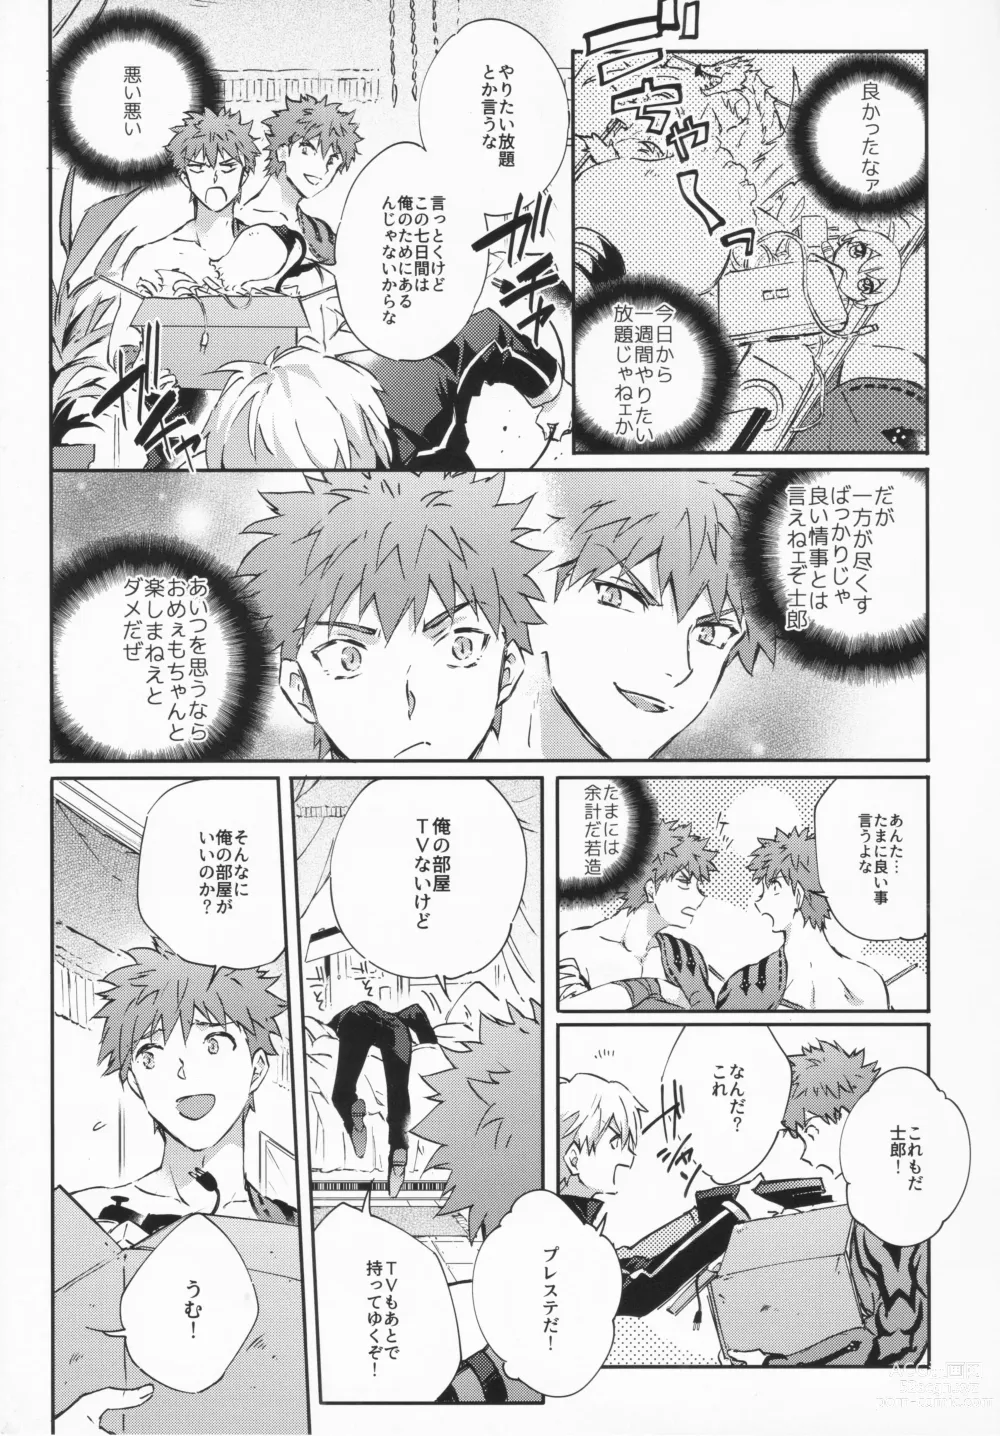 Page 26 of doujinshi STARDUST LOVESONG encore special story 1st After 7 Days